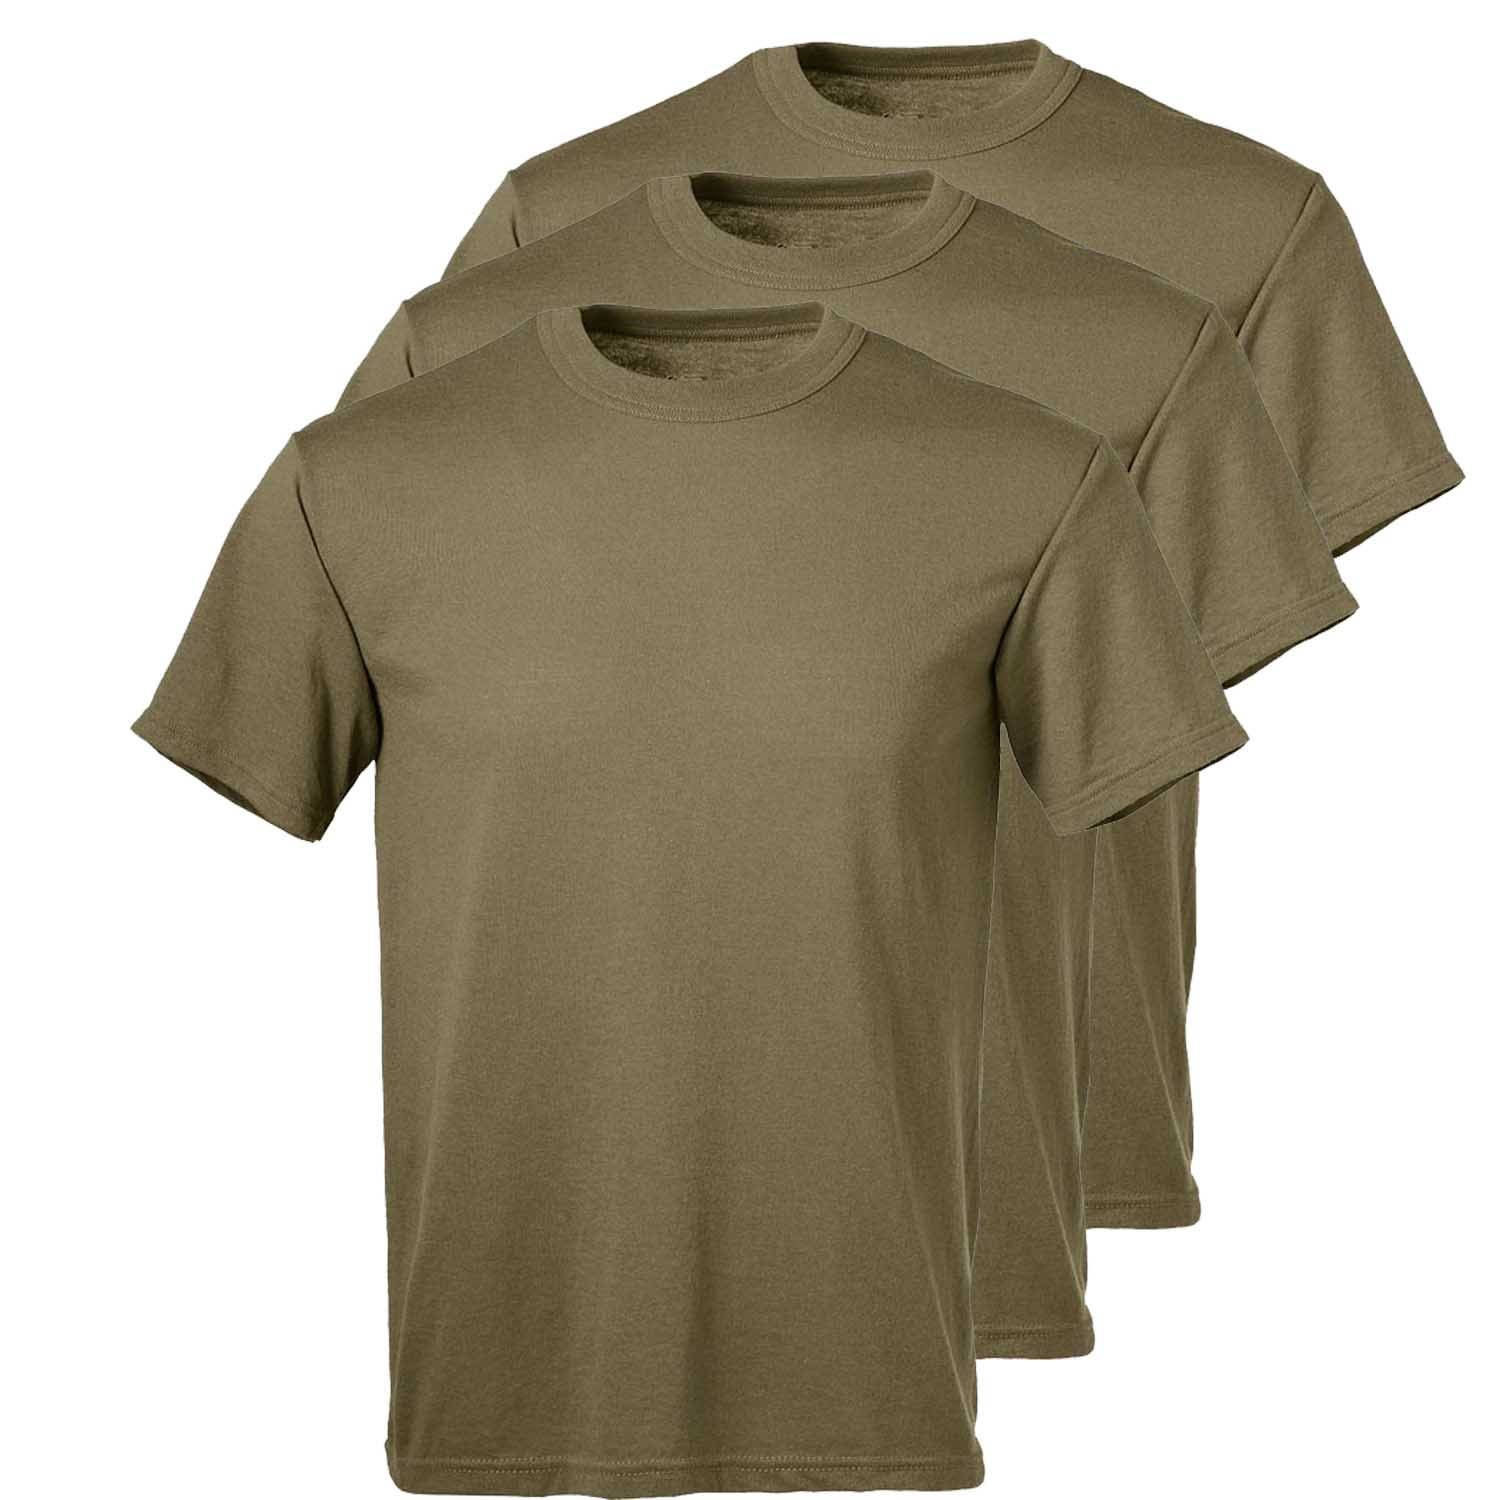 SOFFE 50/50 MILITARY T-SHIRT, 3 PACK